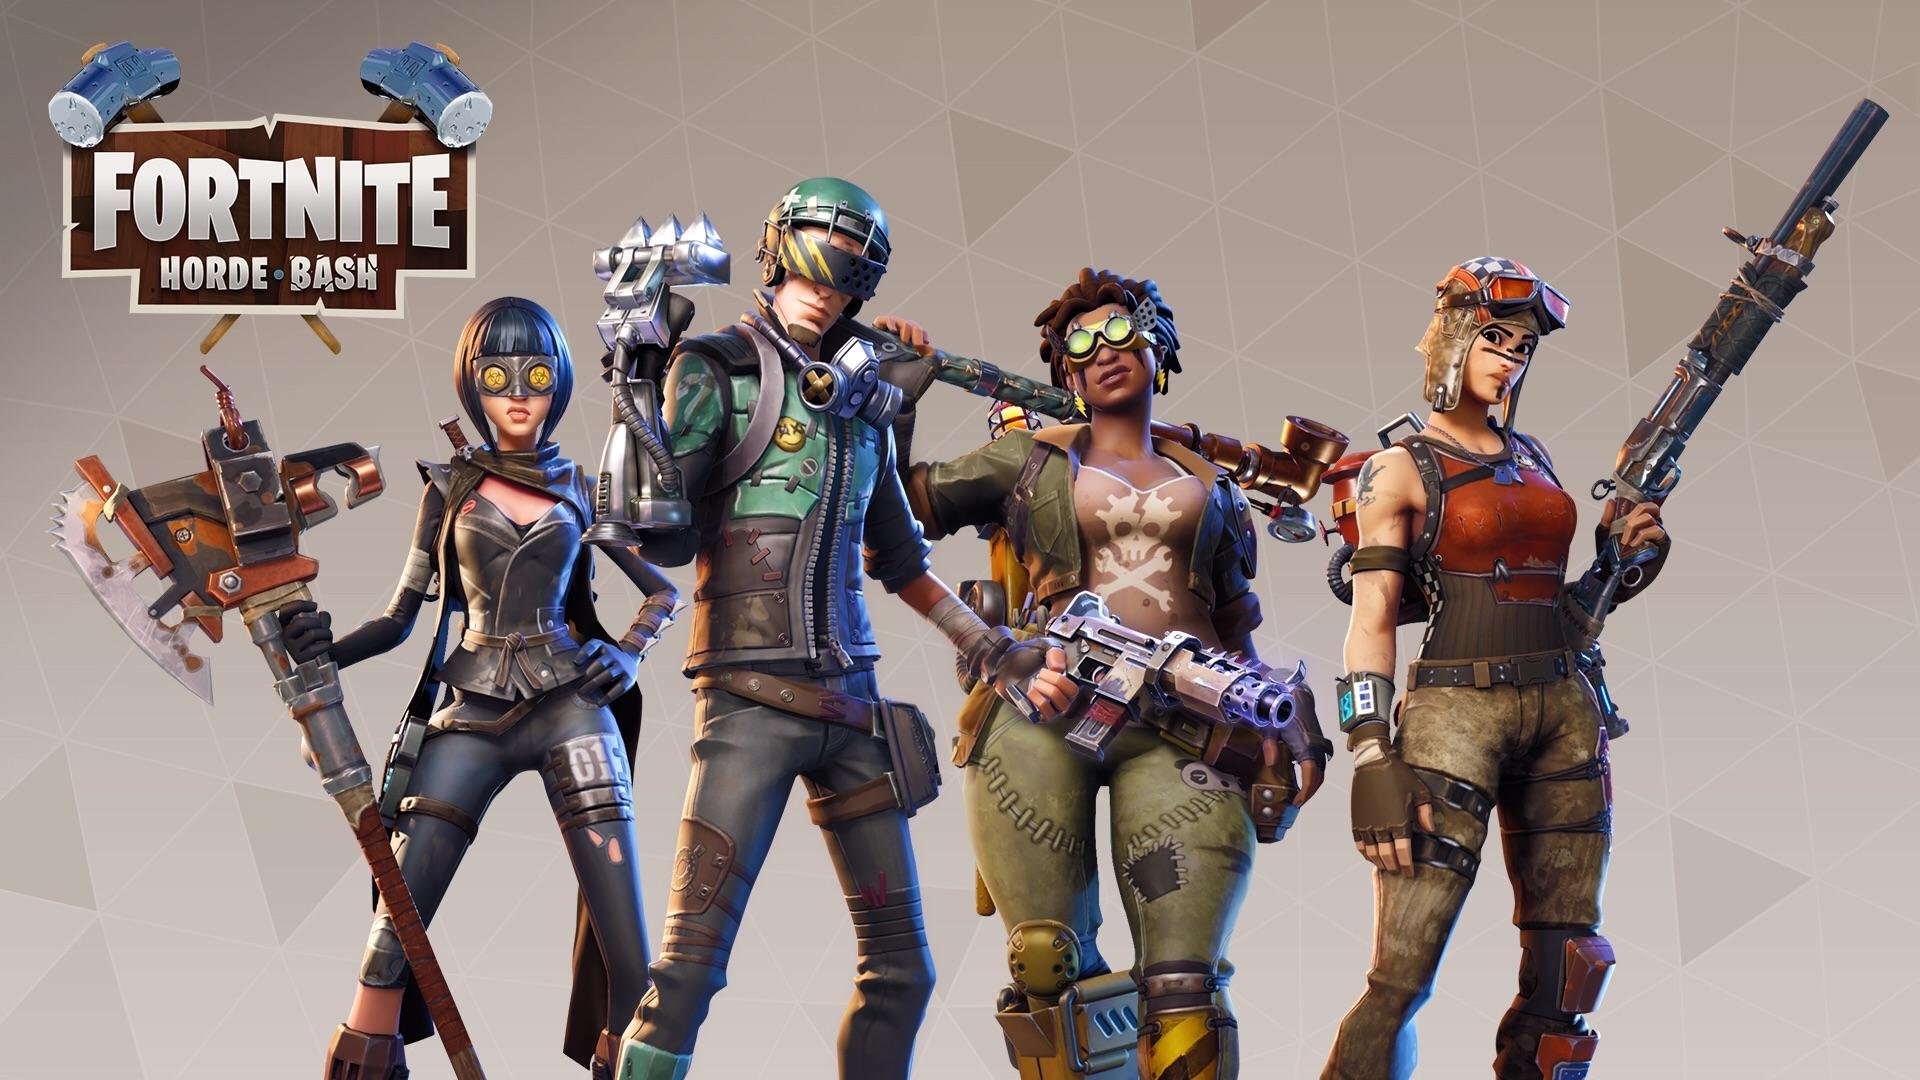 Could Renegade Raider recieve a revamp please In stw she has